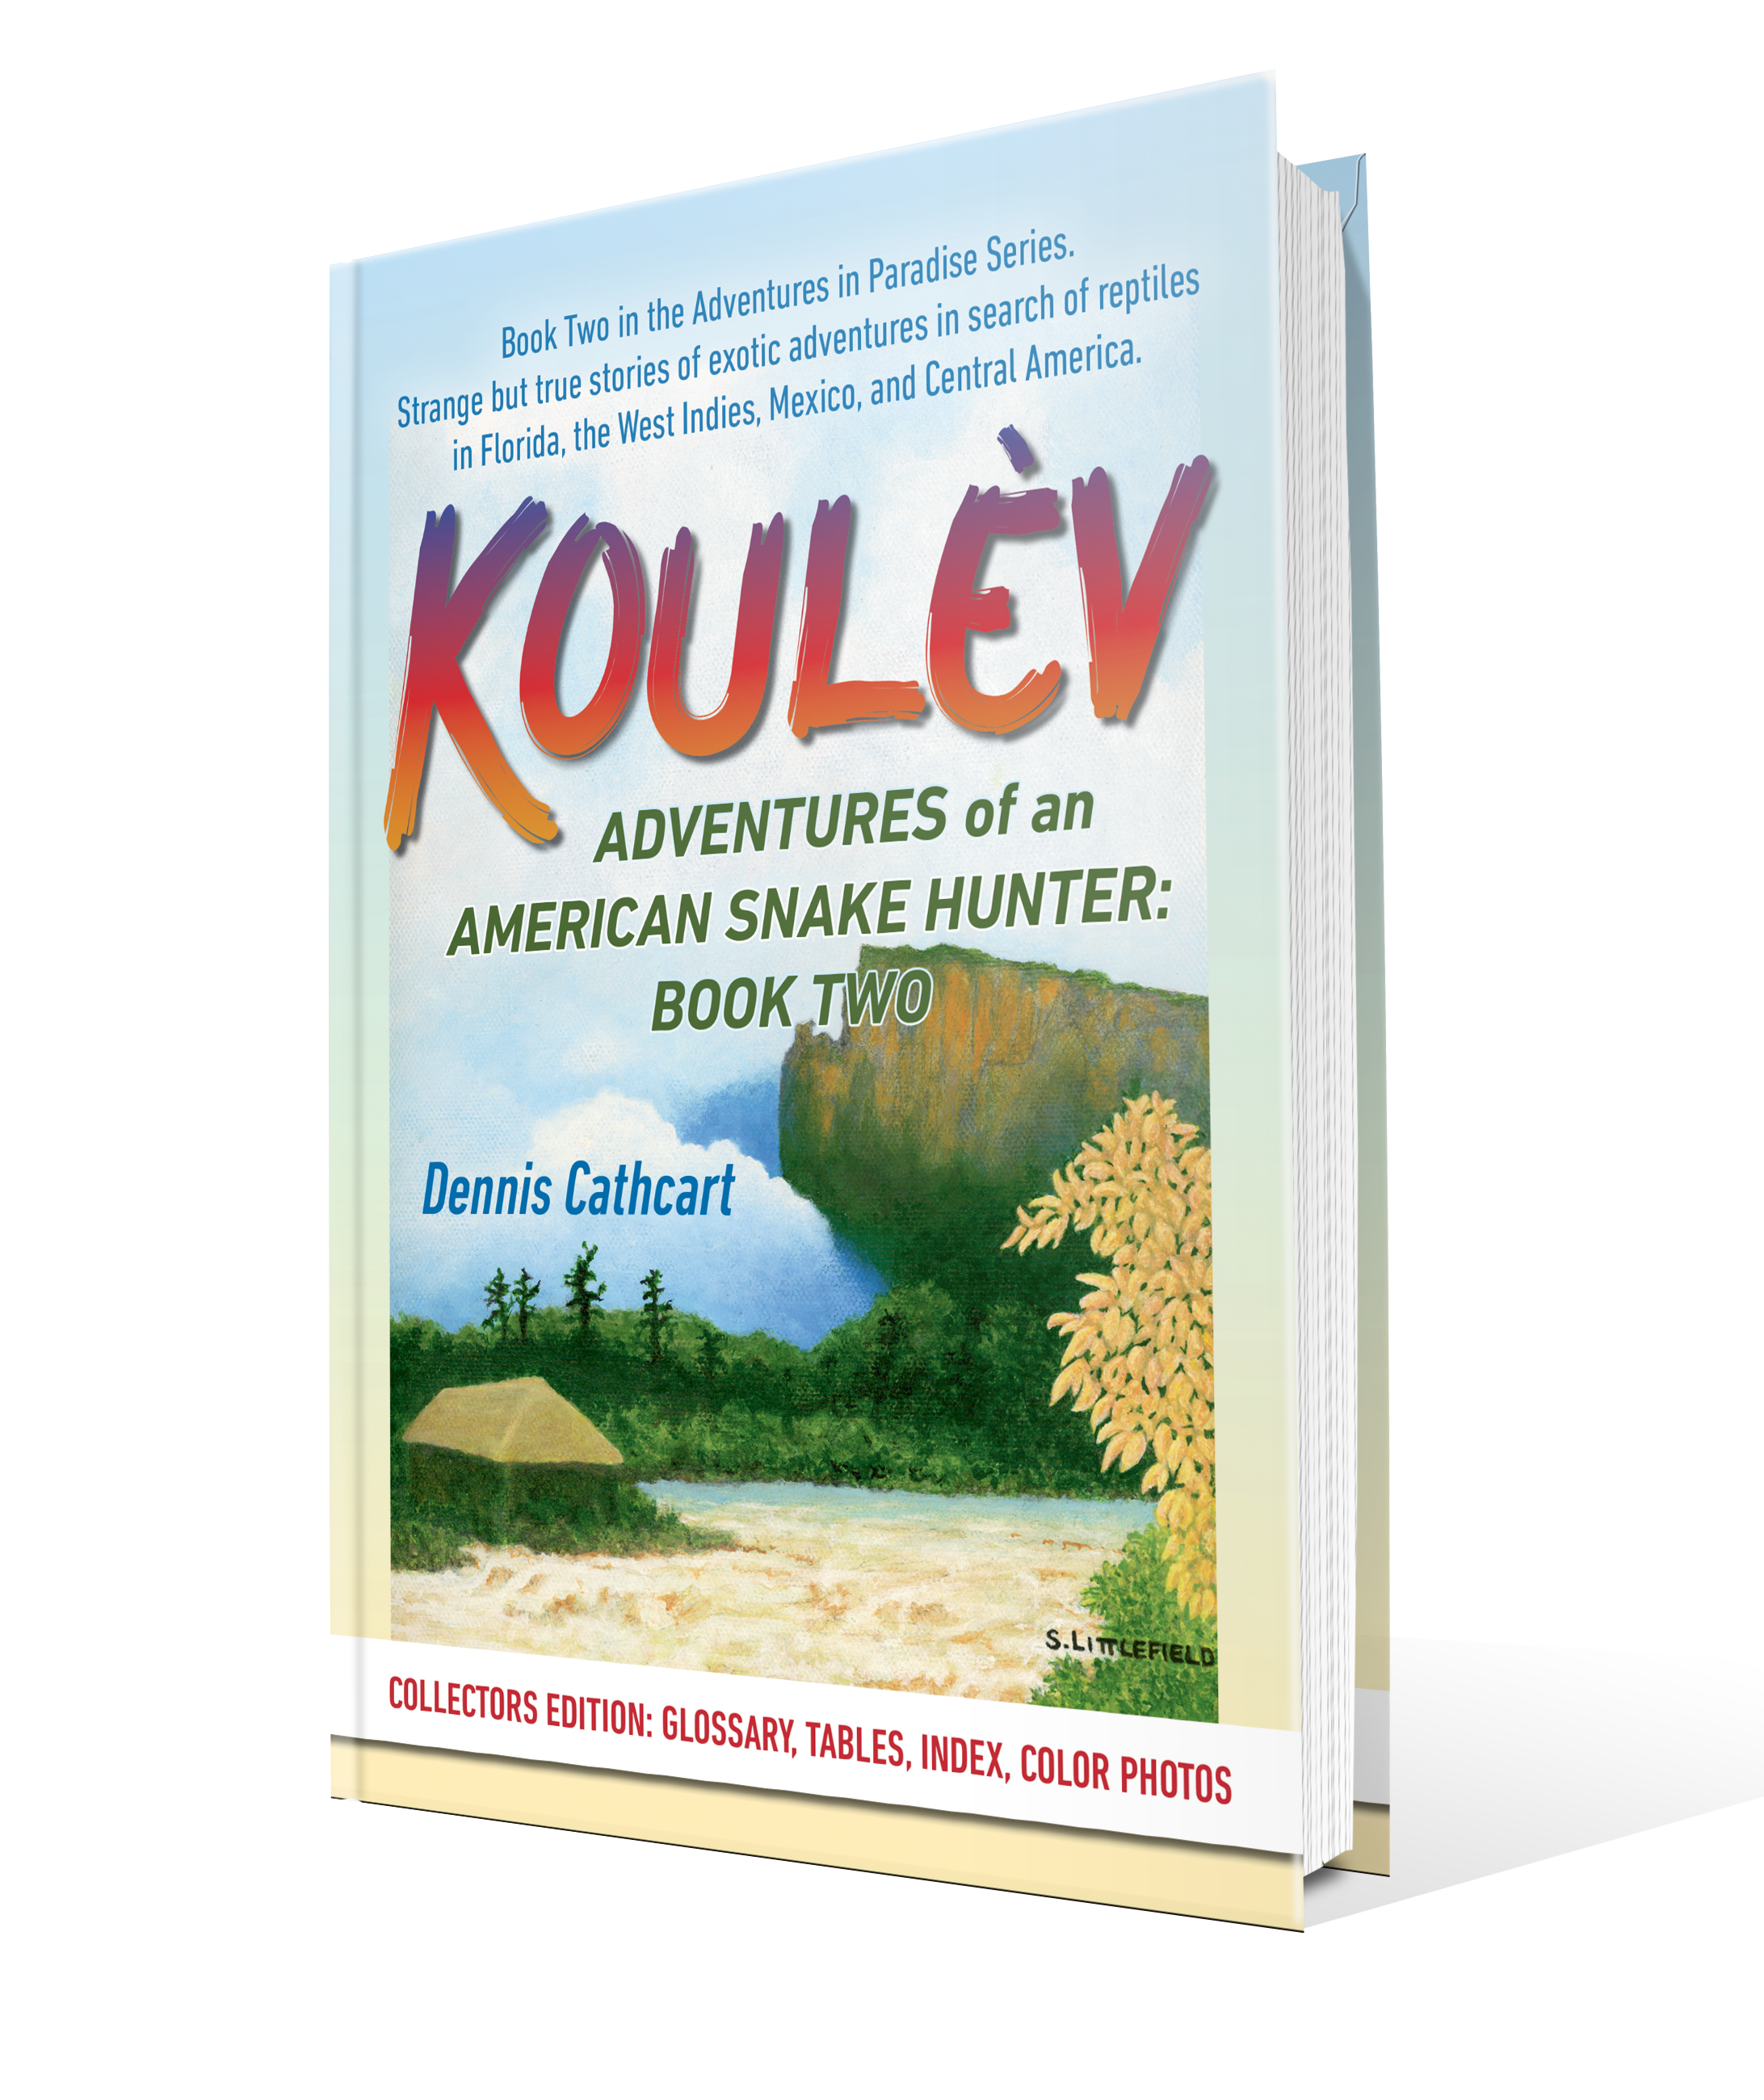 Koulev, Adventures of an American Snake Hunter: Book Two